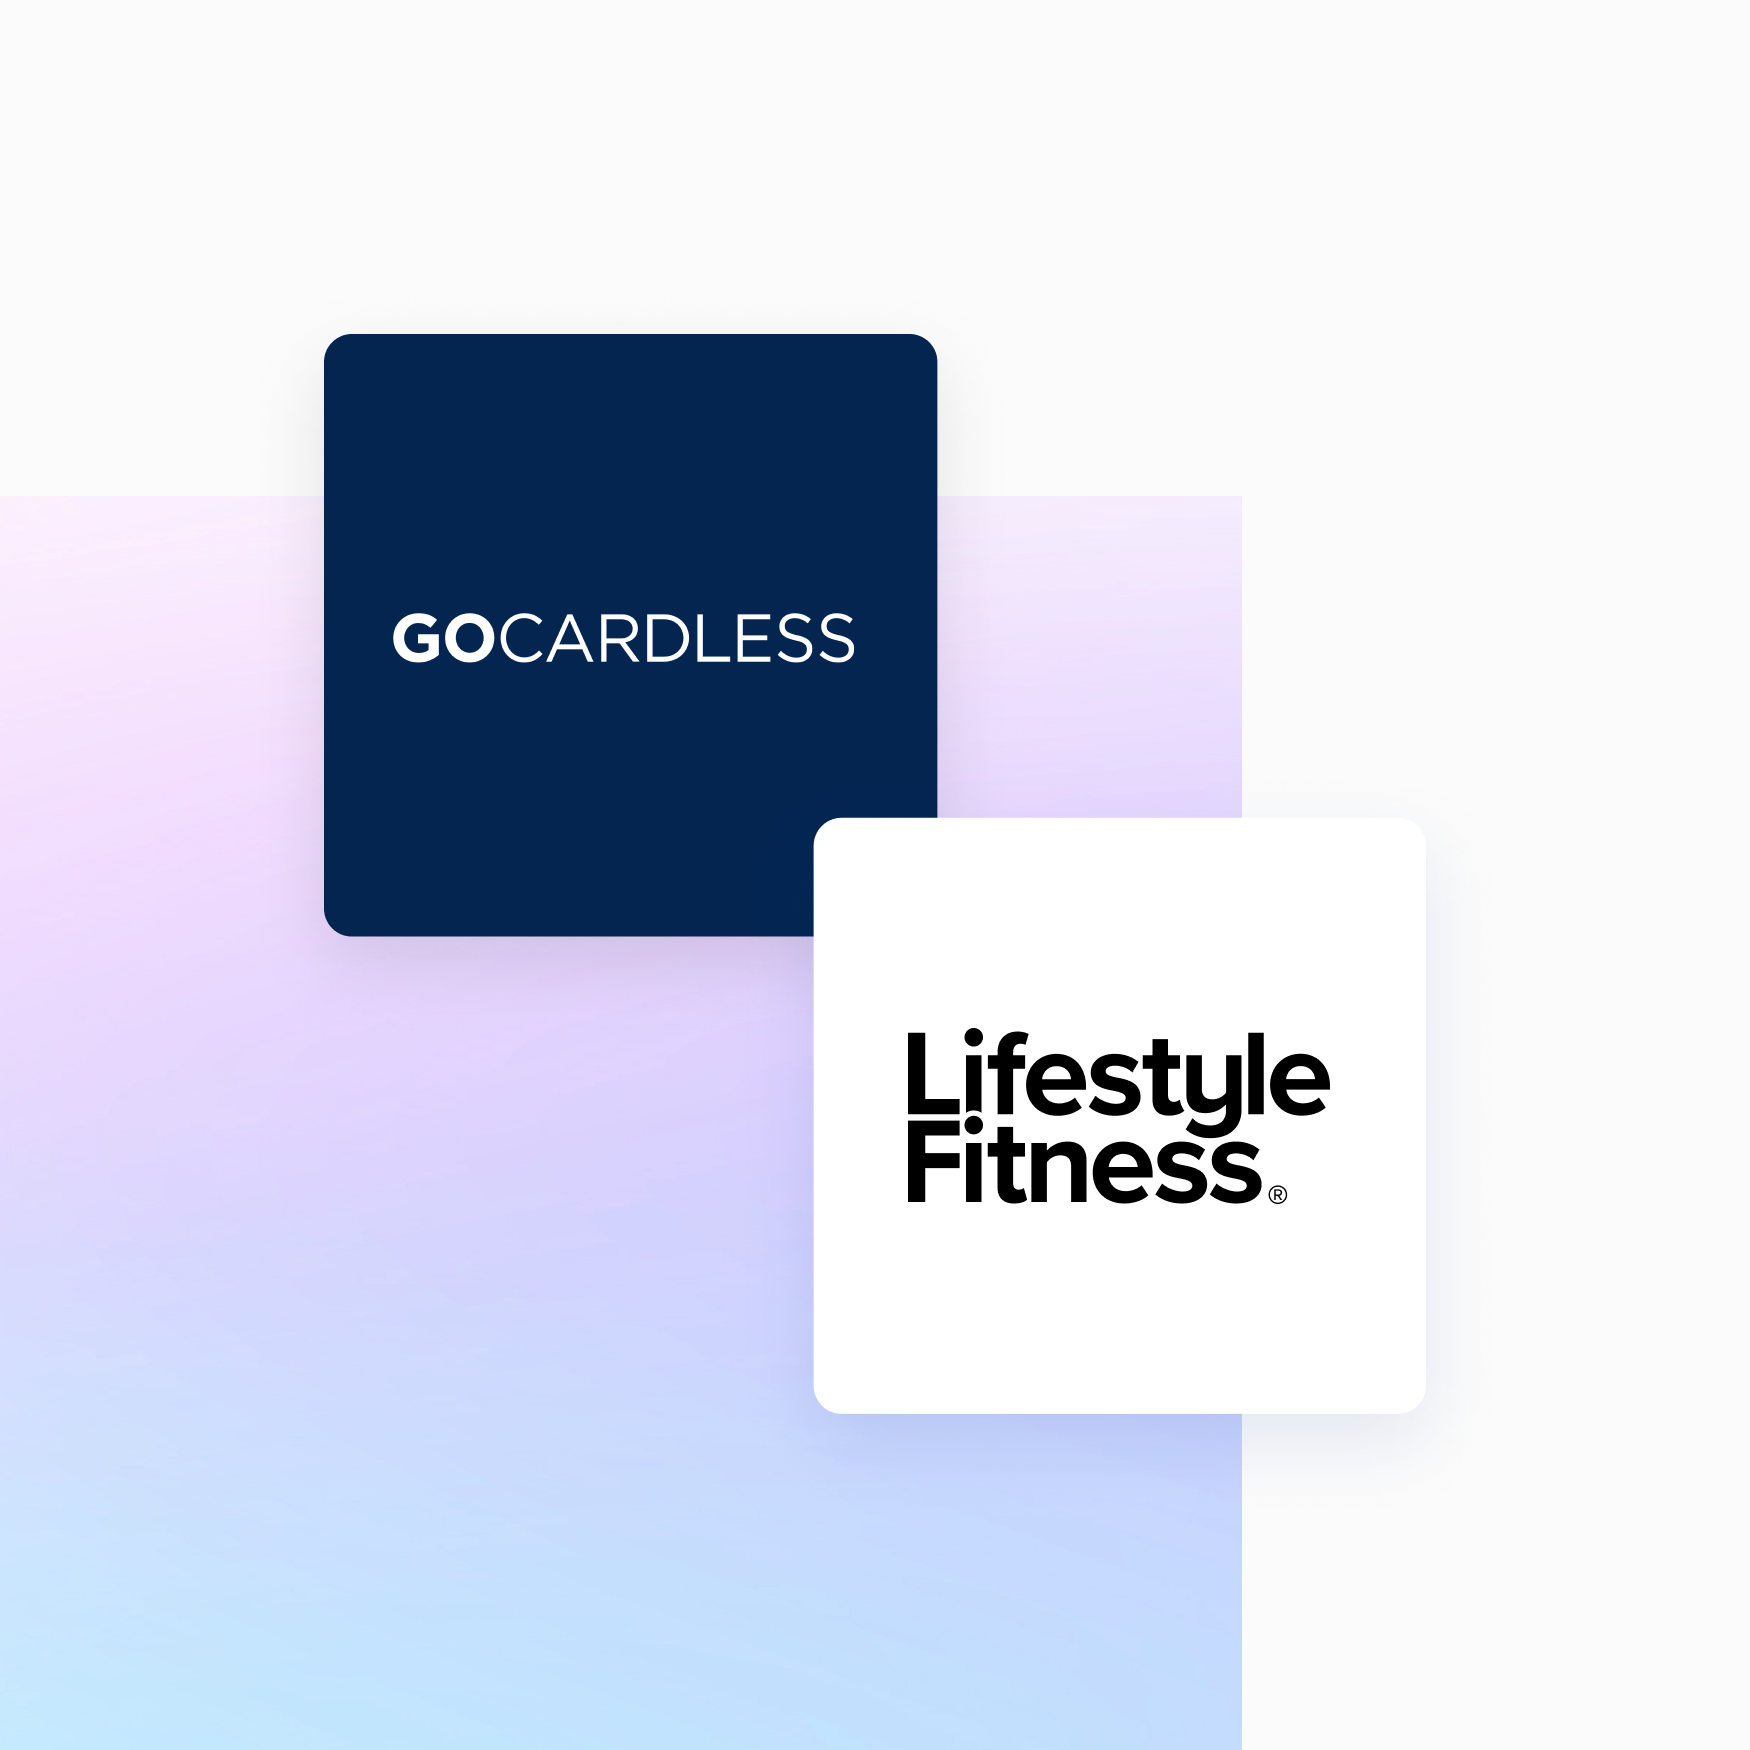 "Every failed payment could become a customer service issue, but Success+ from GoCardless has transformed that experience."